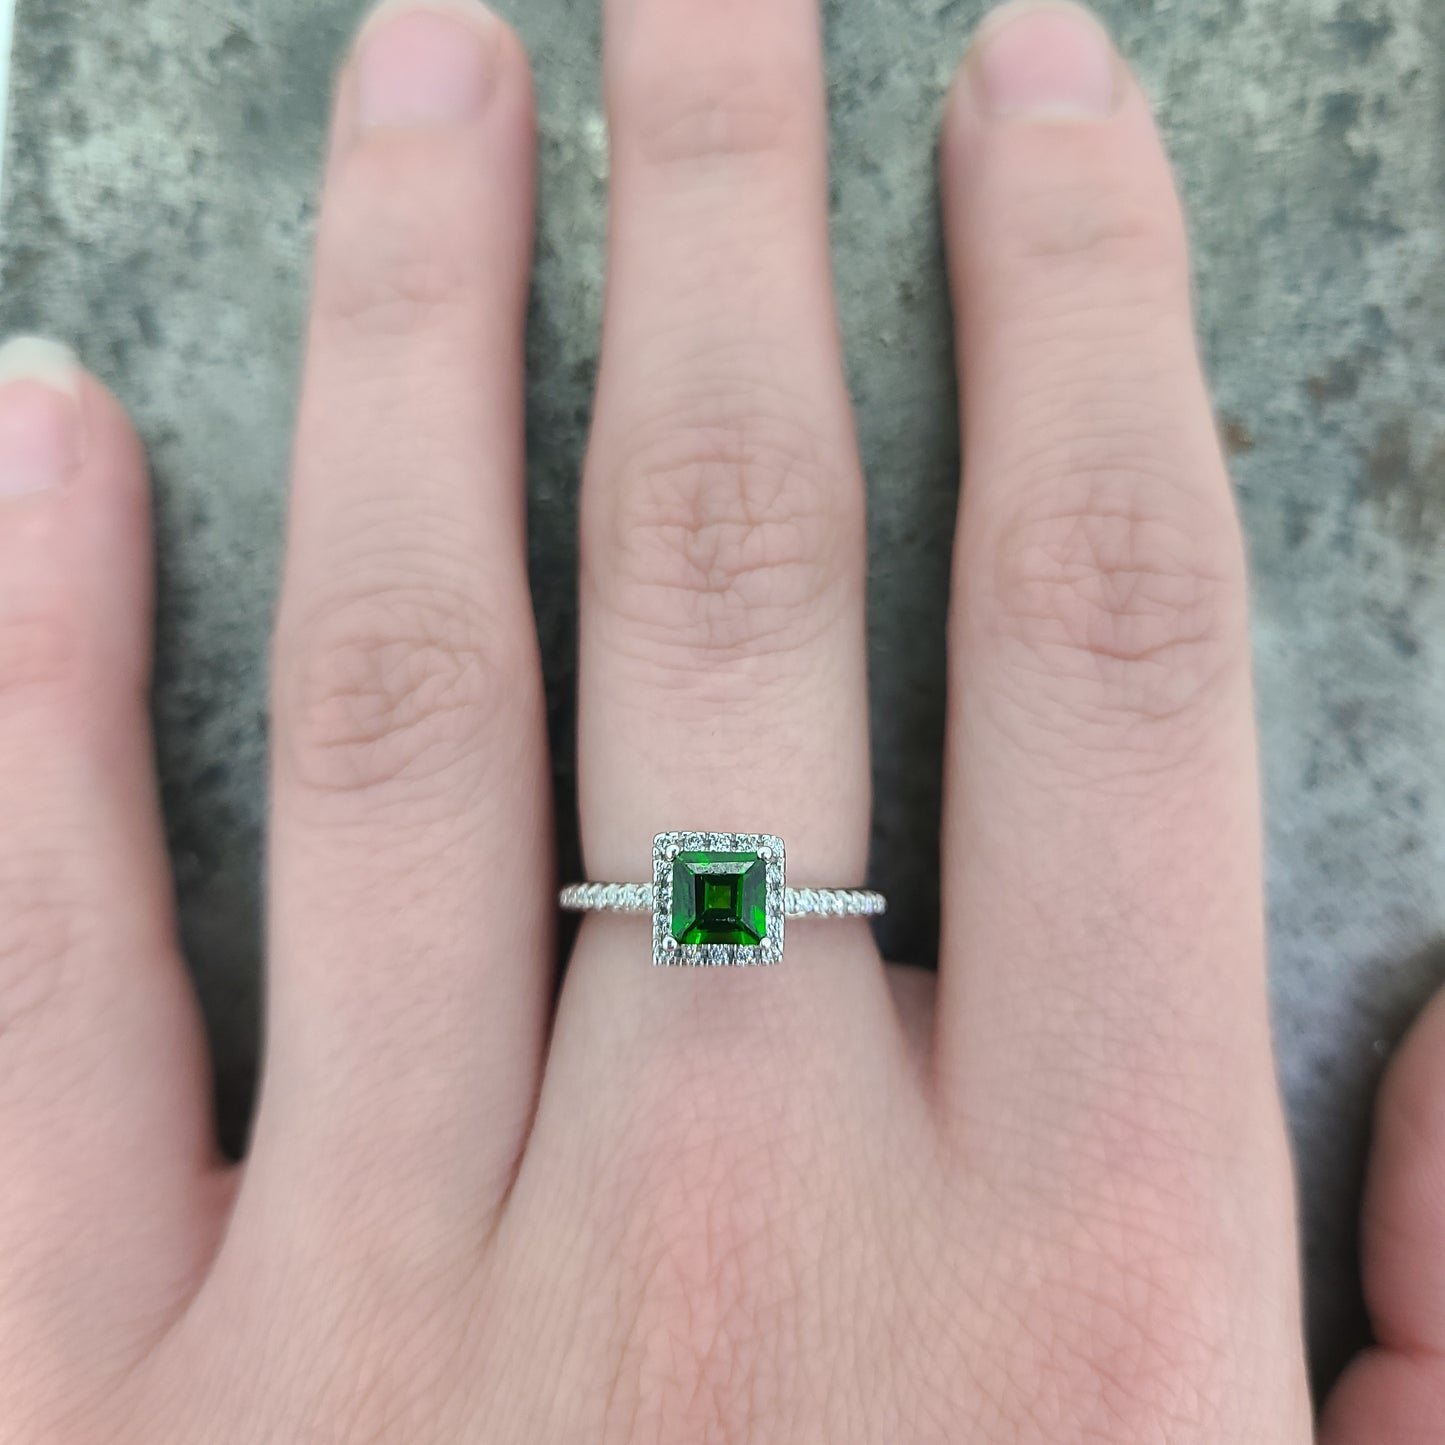 Chrome Diopside and Diamond Ring